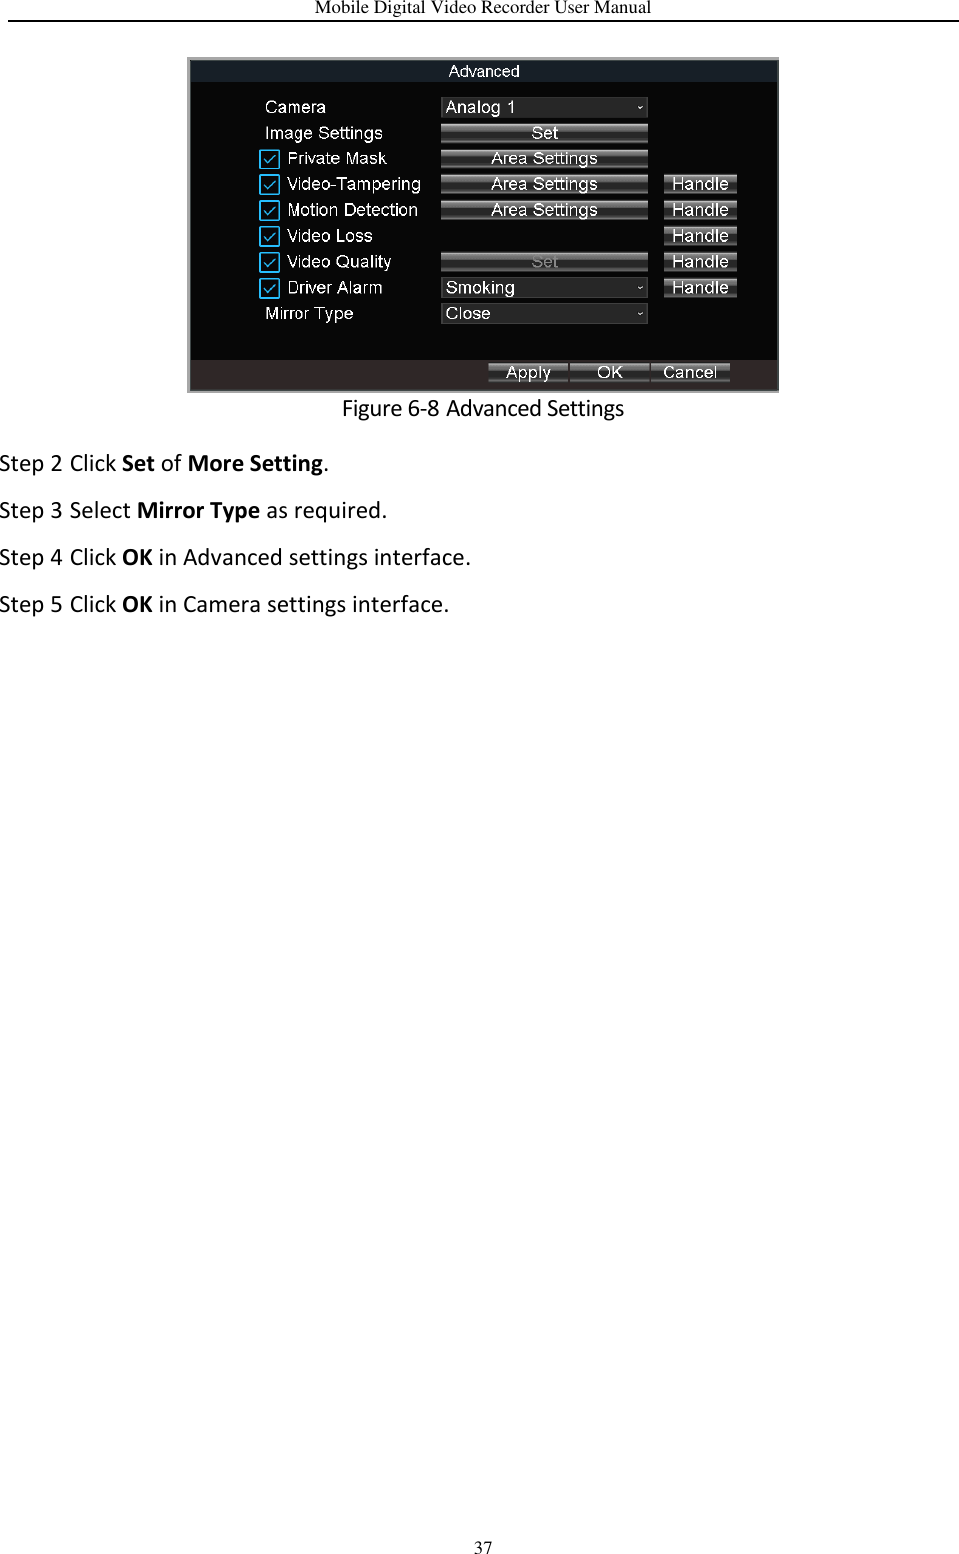 Mobile Digital Video Recorder User Manual 37  Figure 6-8 Advanced Settings Step 2 Click Set of More Setting. Step 3 Select Mirror Type as required. Step 4 Click OK in Advanced settings interface. Step 5 Click OK in Camera settings interface.  